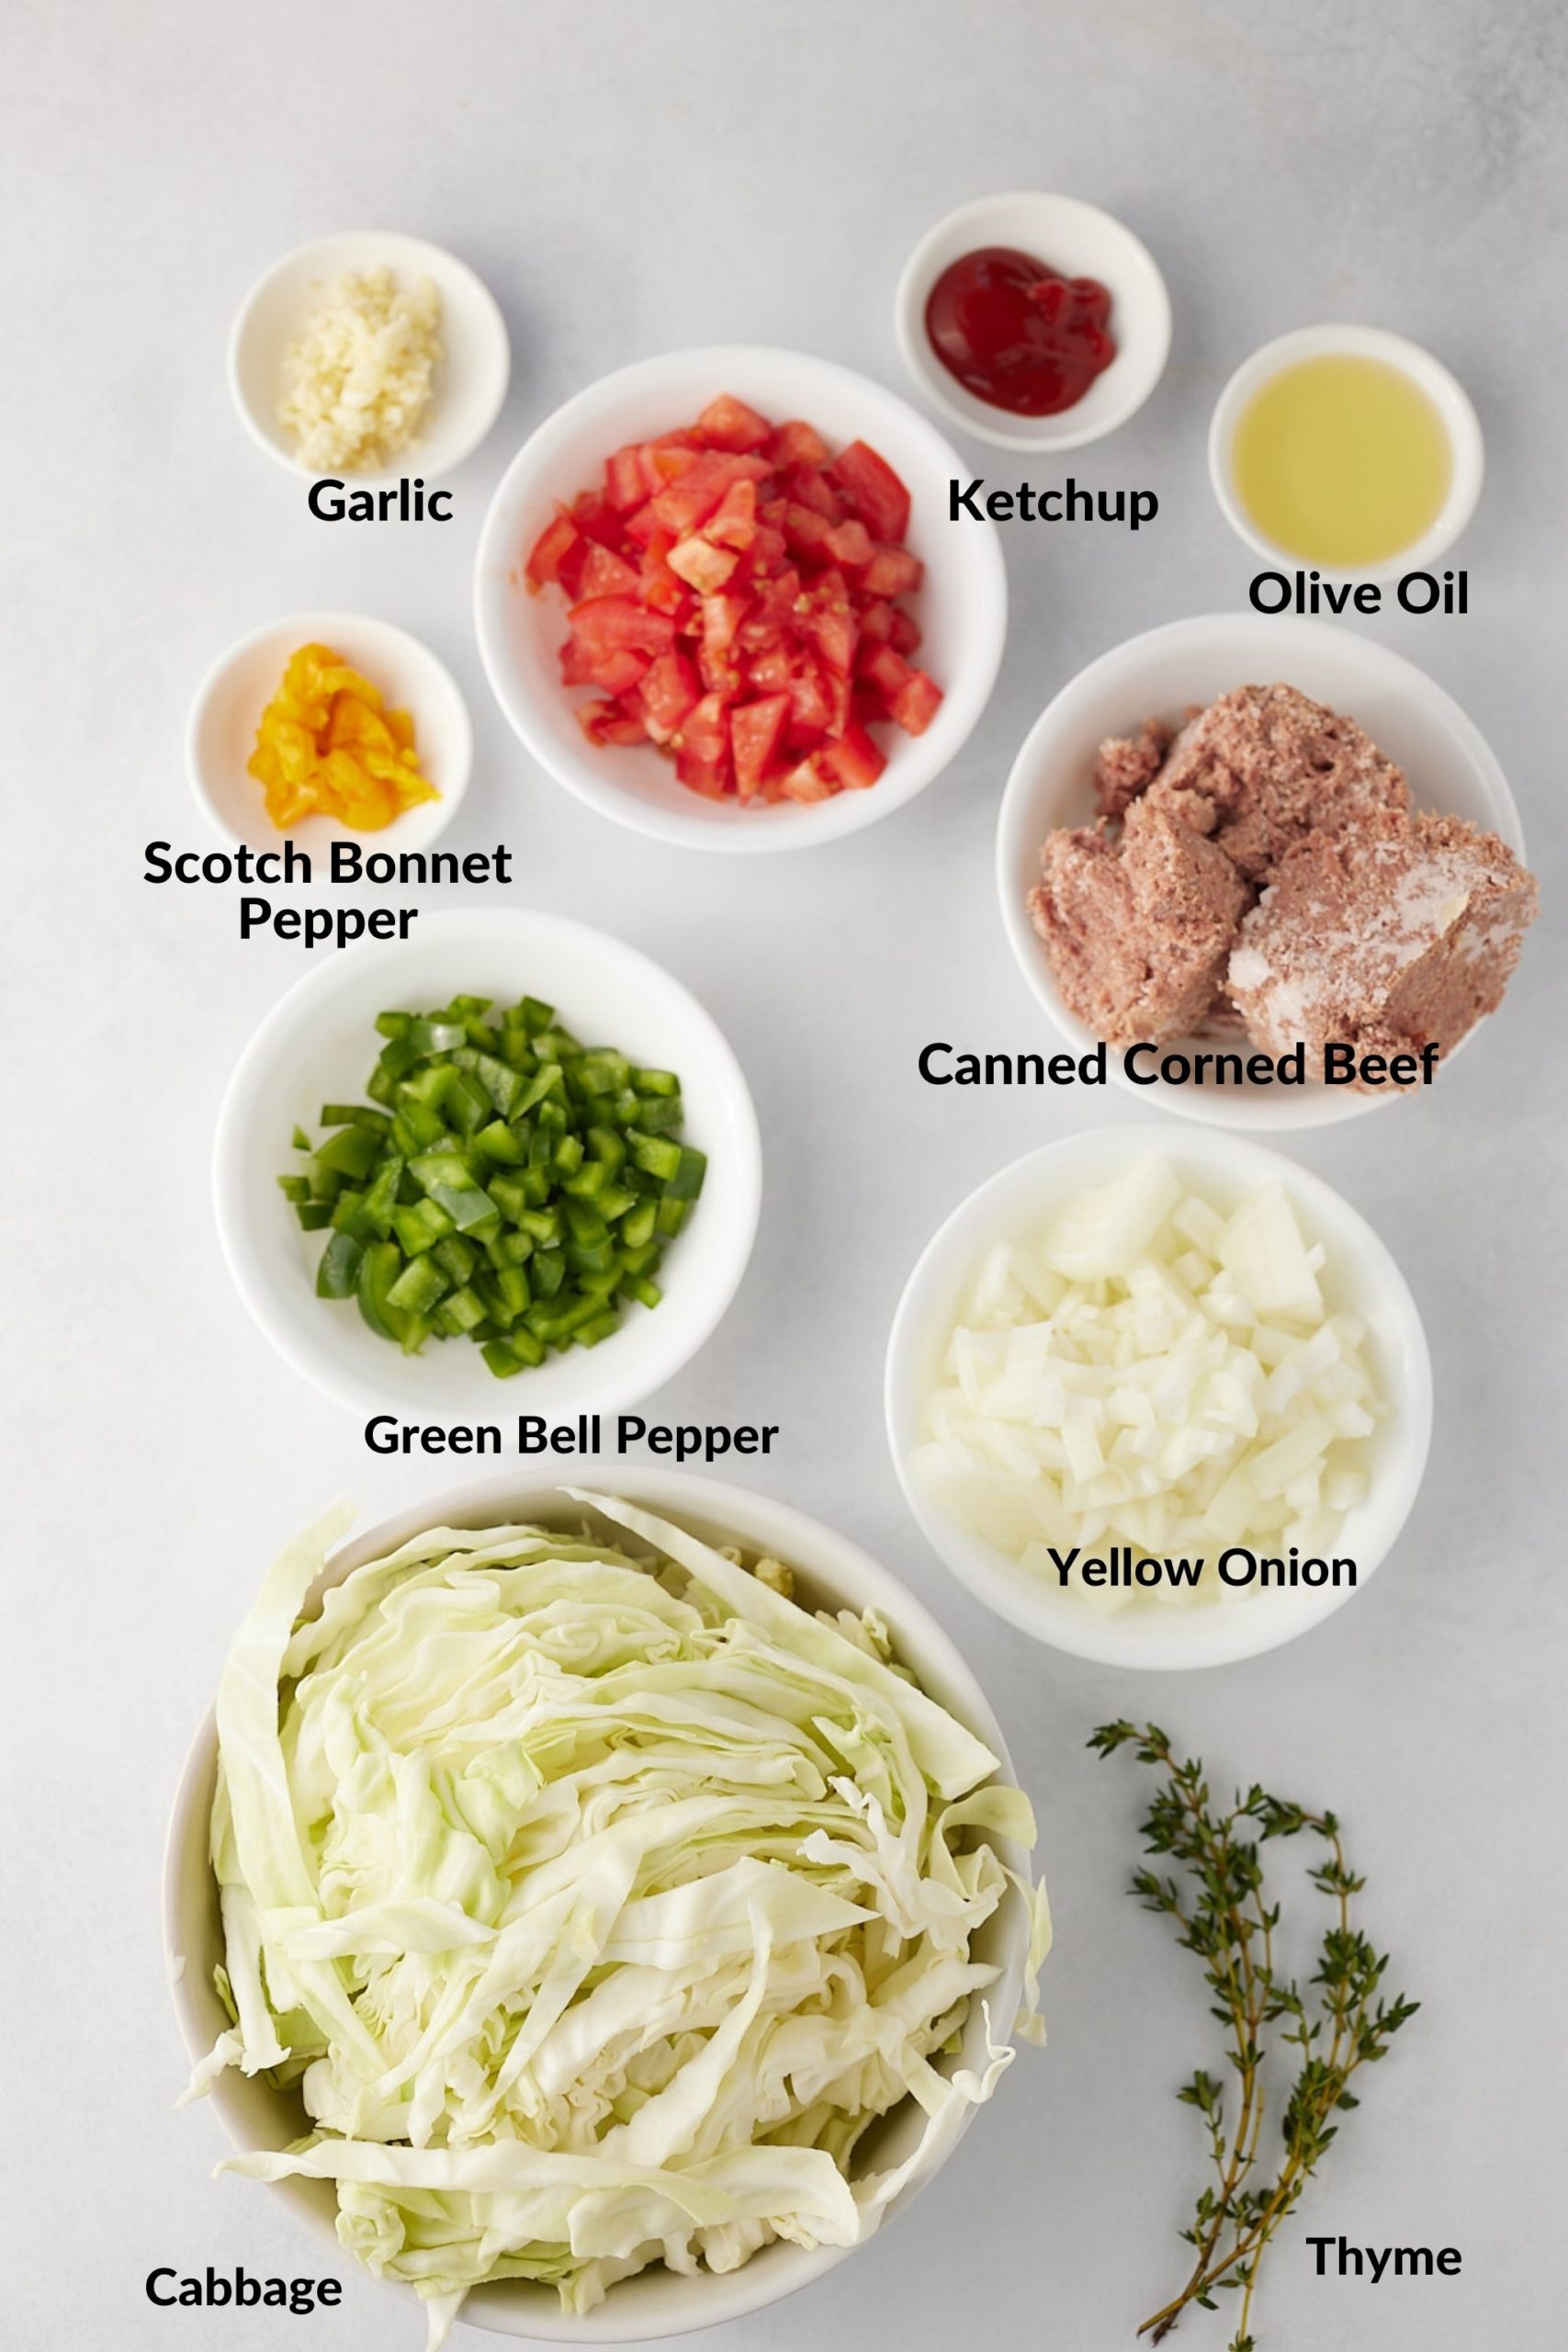 Ingredients for corned beef and cabbage on white background